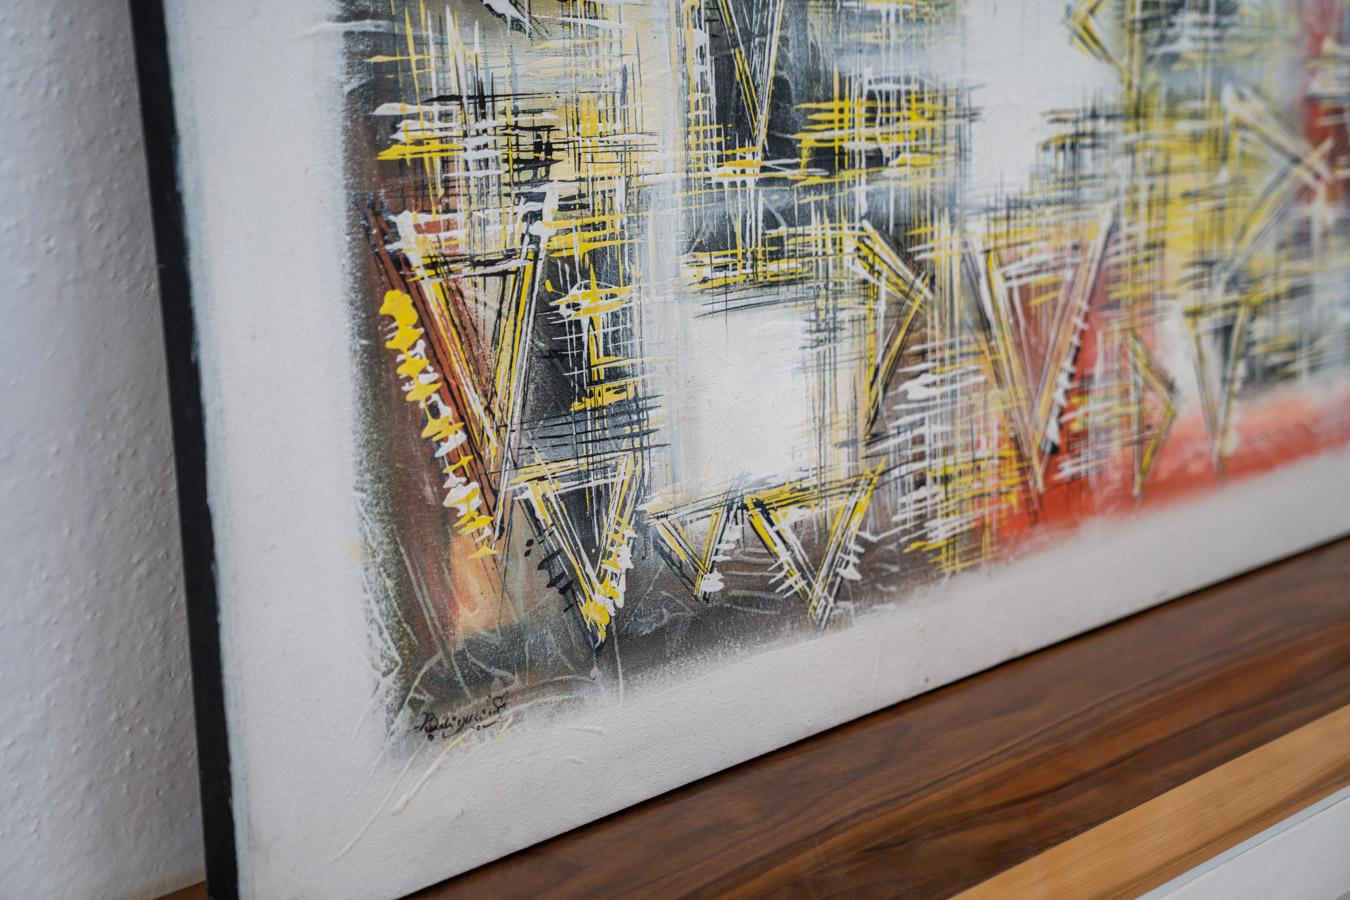 Abstract painting on acrylic canvas from the 2000s
DESIGN PERIOD 2000
YEAR OF MANUFACTURE 2000
COUNTRY OF PRODUCTION Italy
DESIGN
MANUFACTURER
COLOR yellow, black, white, red, green, gray, orange
MATERIALS canvas, acrylic, wood
CONDITION